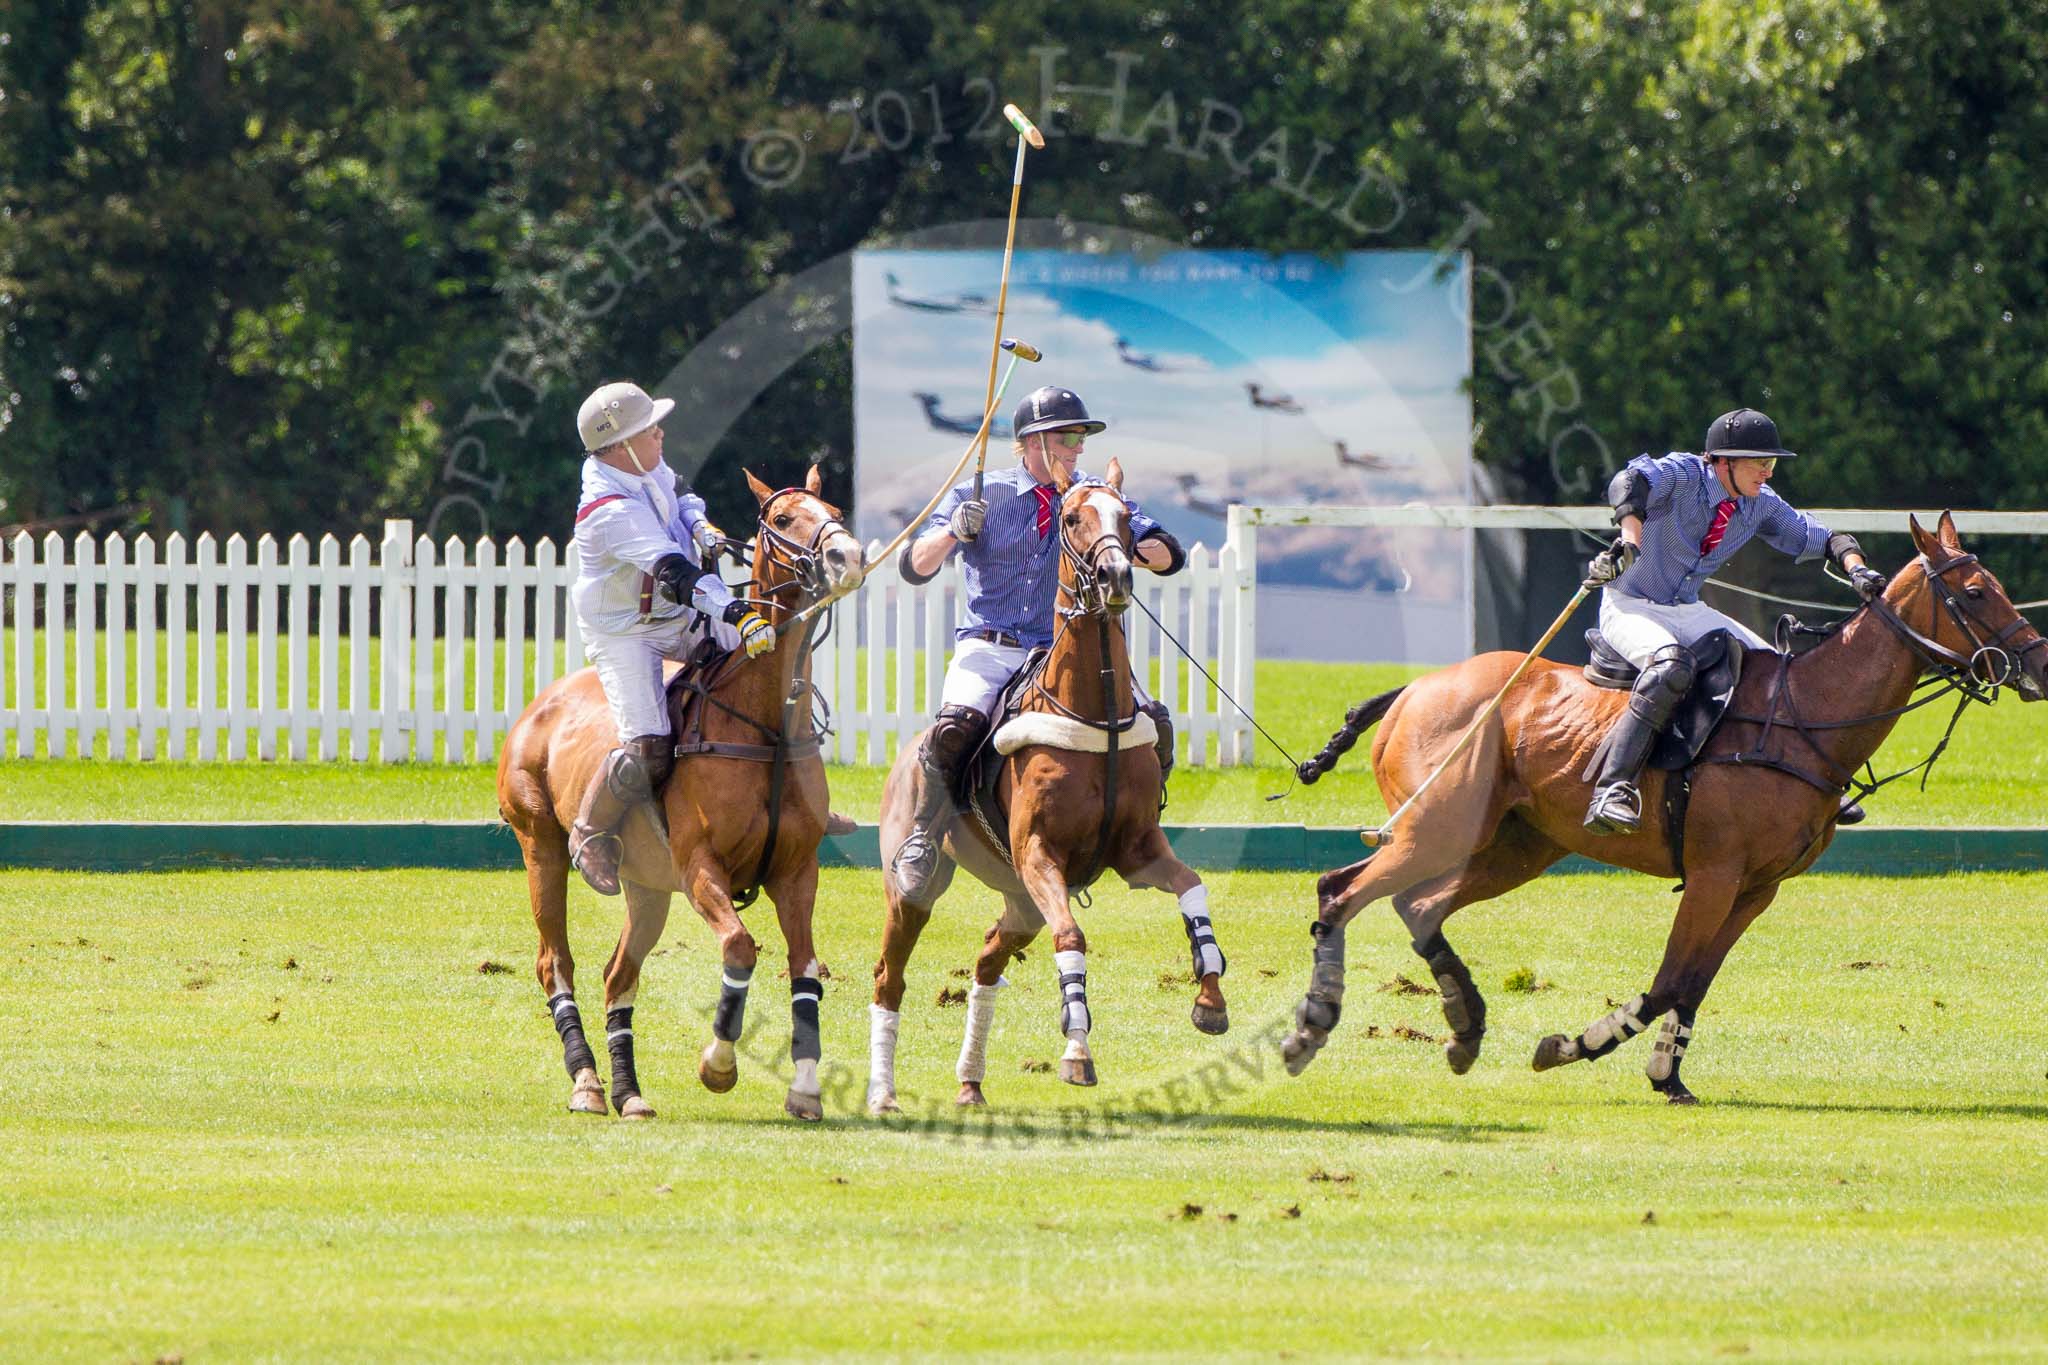 7th Heritage Polo Cup finals: Under the neck shot by Mariano Darritchon..
Hurtwood Park Polo Club,
Ewhurst Green,
Surrey,
United Kingdom,
on 05 August 2012 at 14:10, image #66